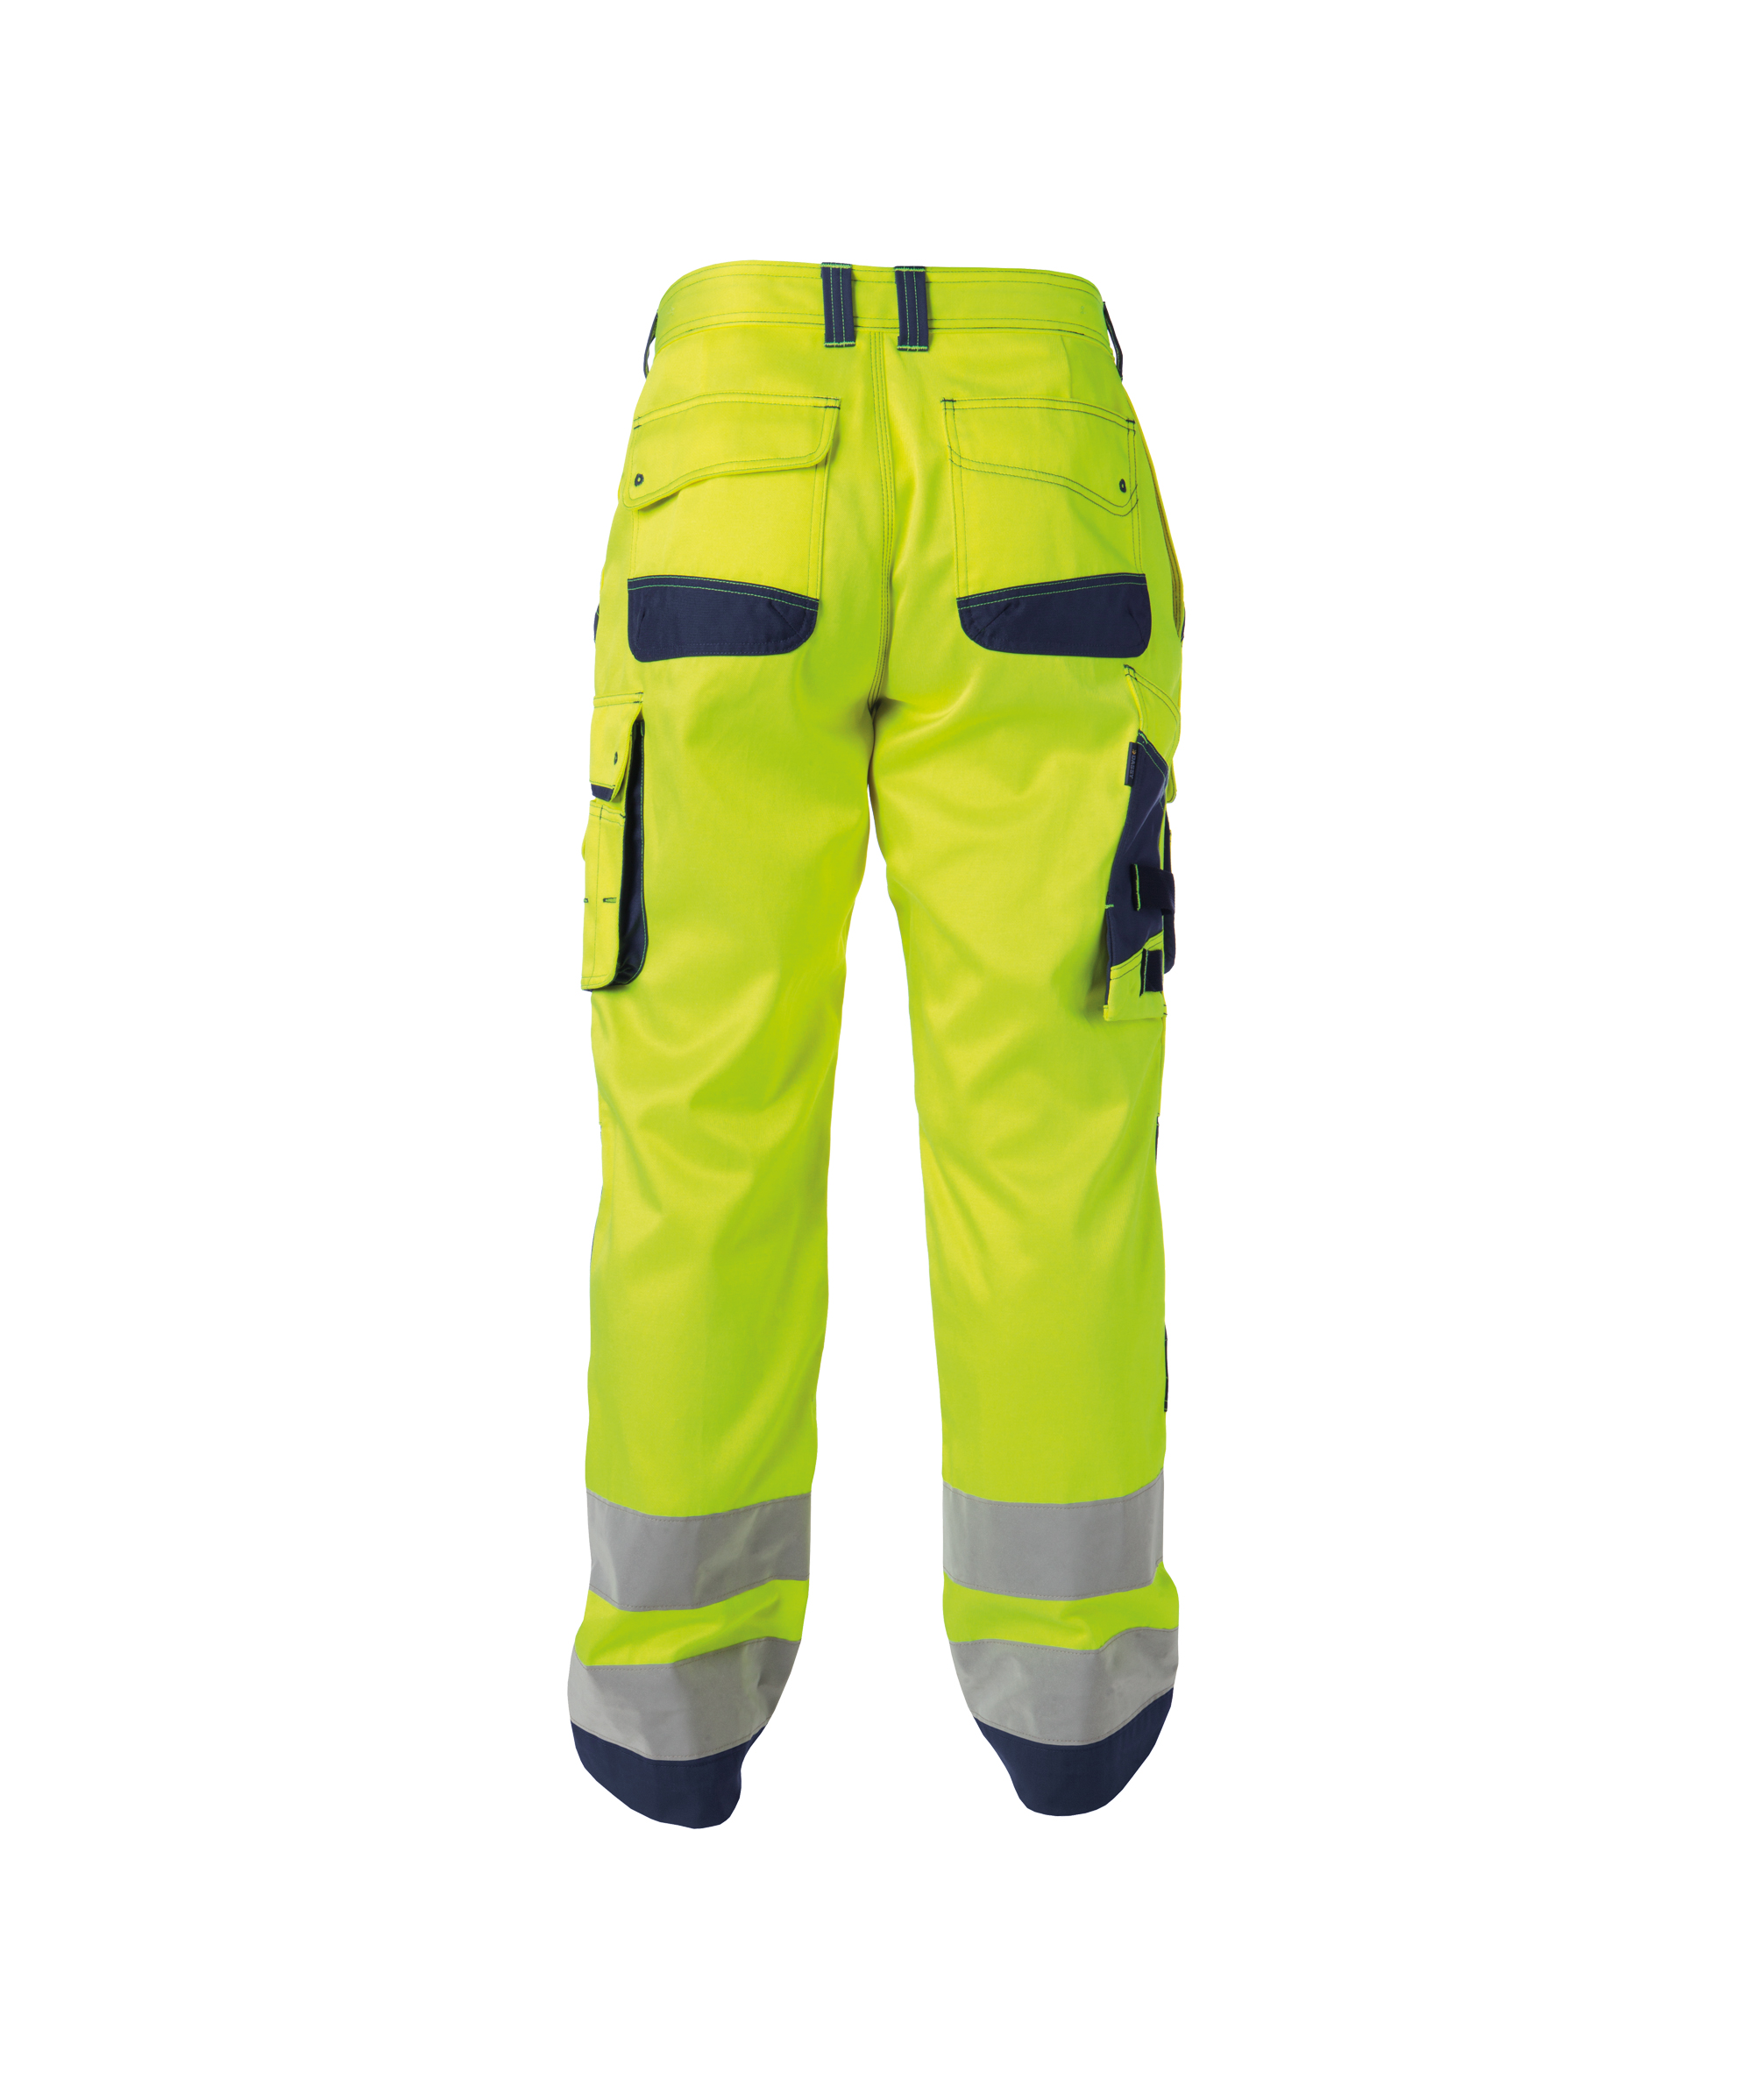 chicago_high-visibility-work-trousers-with-knee-pockets_fluo-yellow-navy_back.jpg